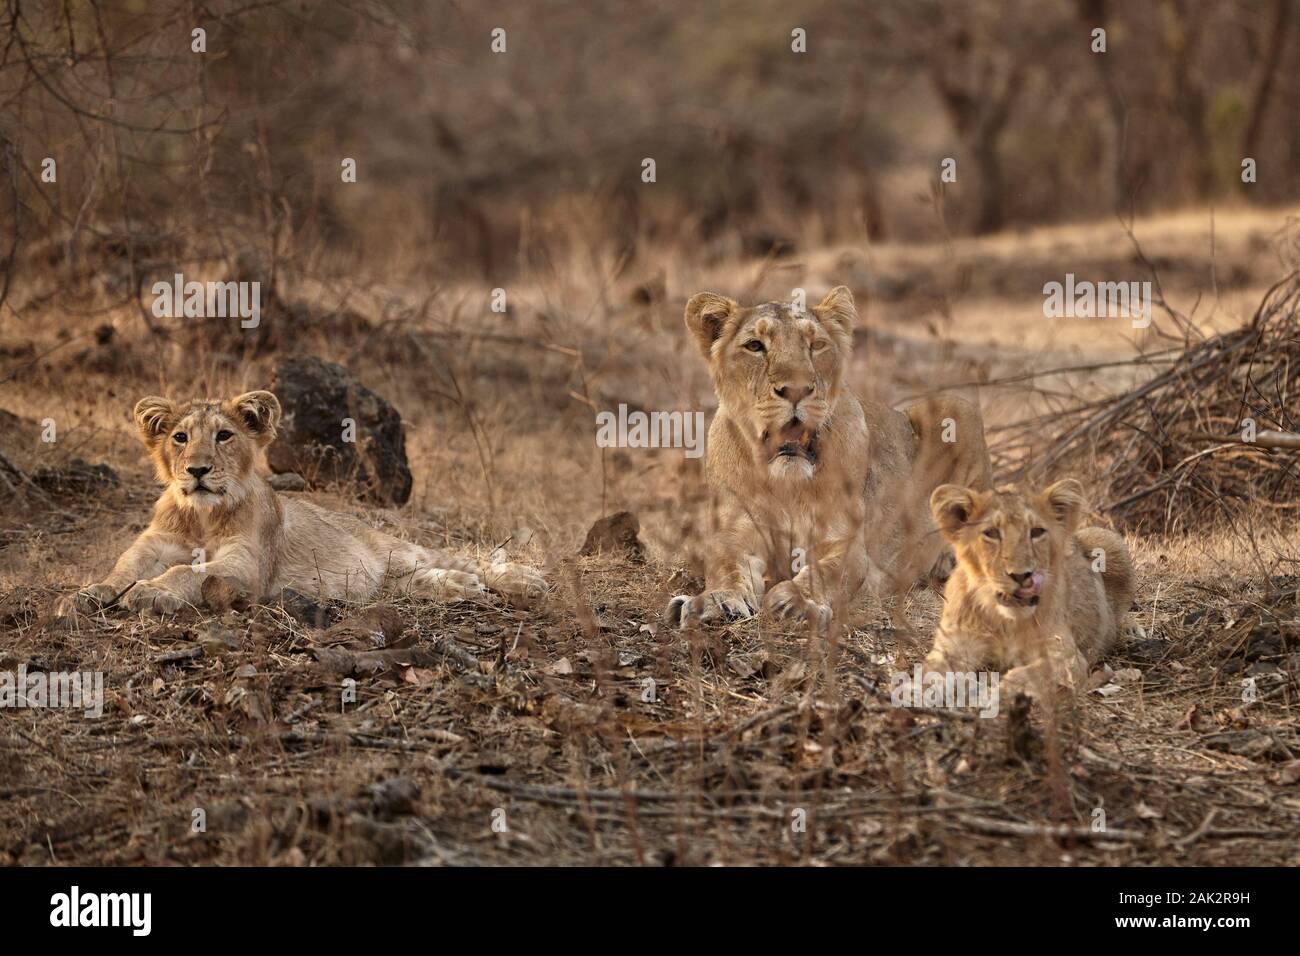 Asiatic Lion family at gir forest, India. Stock Photo